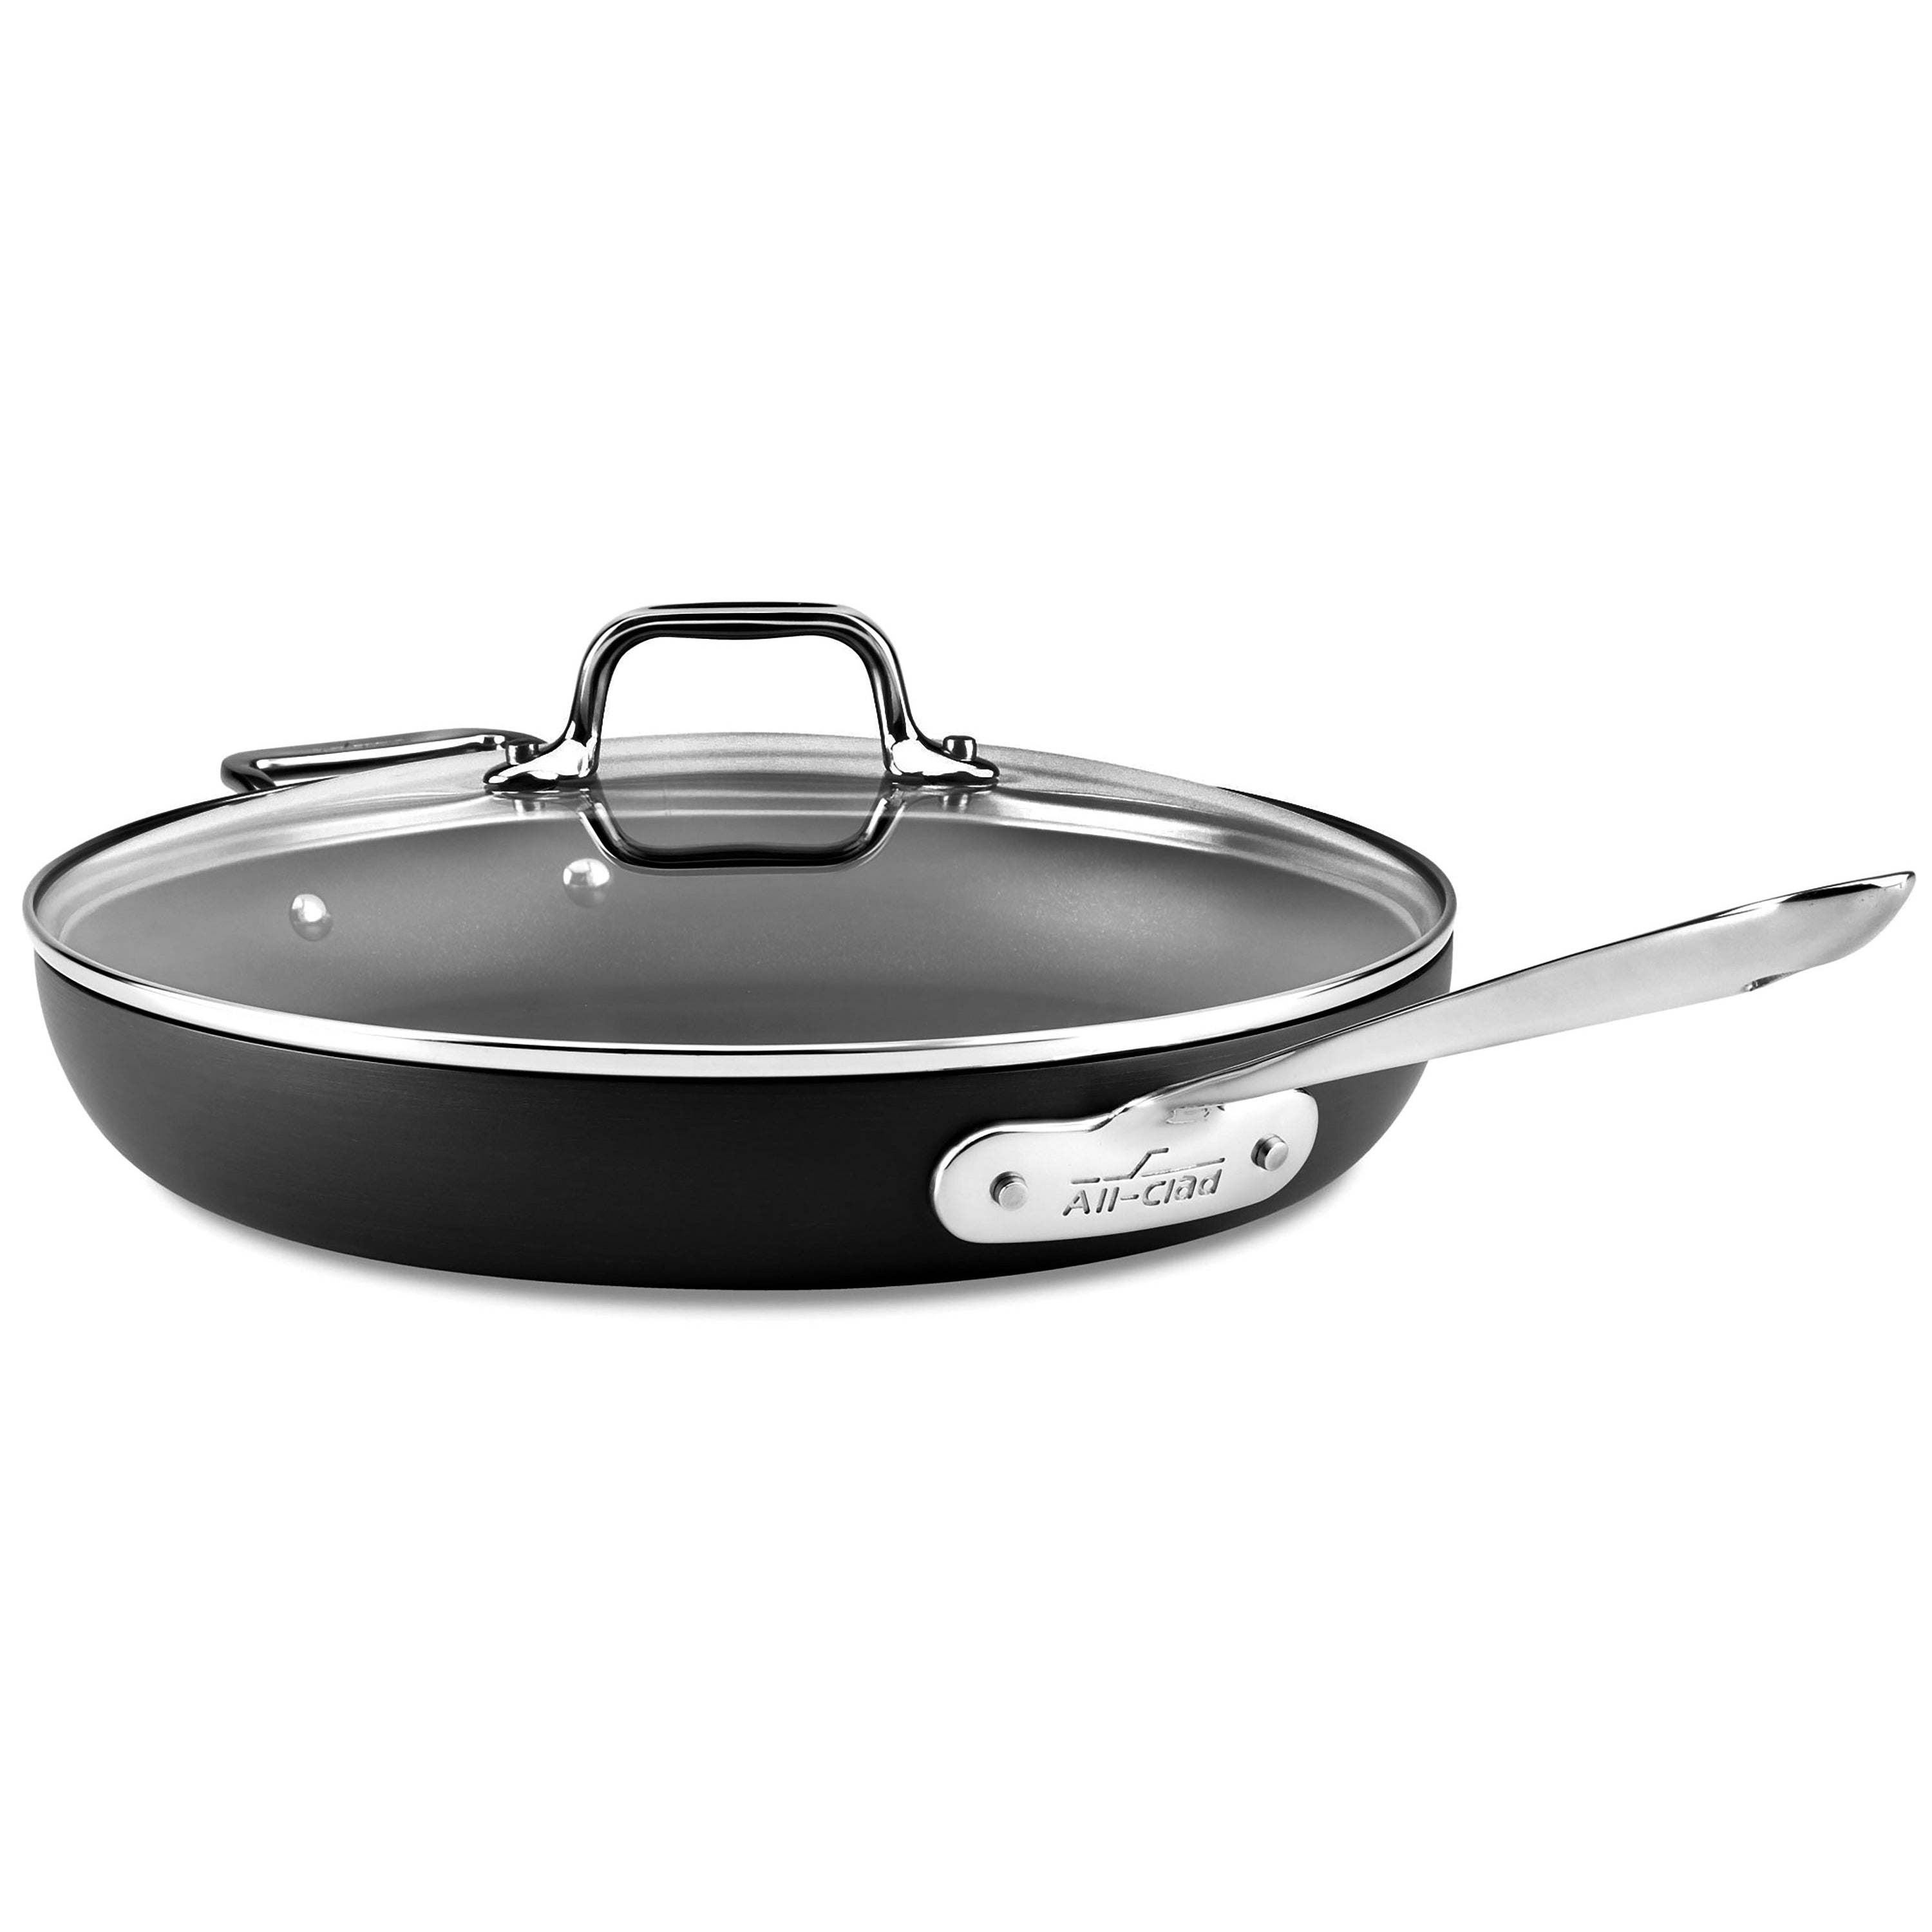 12 Inch Hard Anodized Nonstick Fry Pan All Clad HA1 Induction